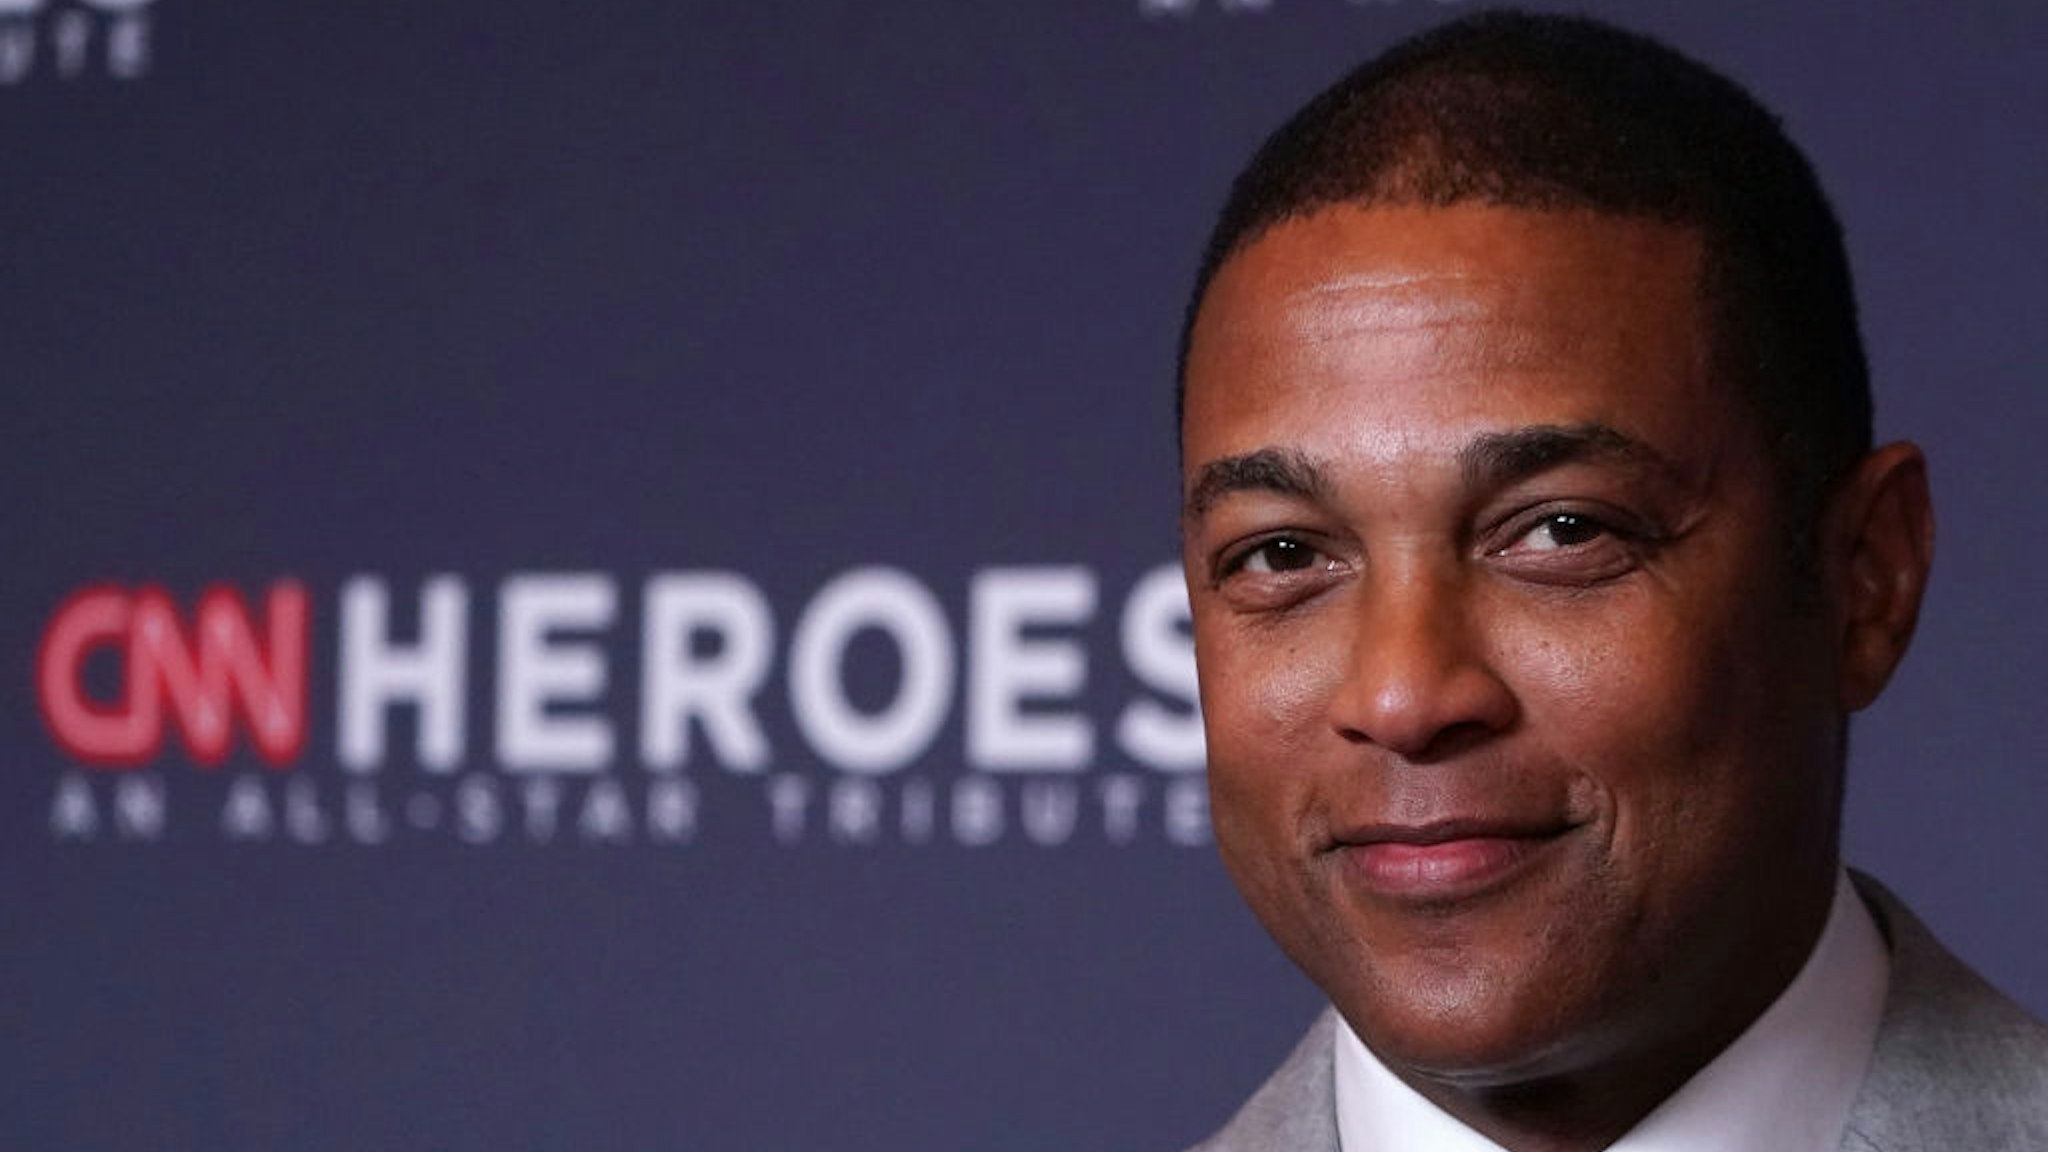 NEW YORK, NEW YORK - DECEMBER 08: Don Lemon attends the 13th Annual CNN Heroes at the American Museum of Natural History on December 08, 2019 in New York City. (Photo by J. Countess/Getty Images)